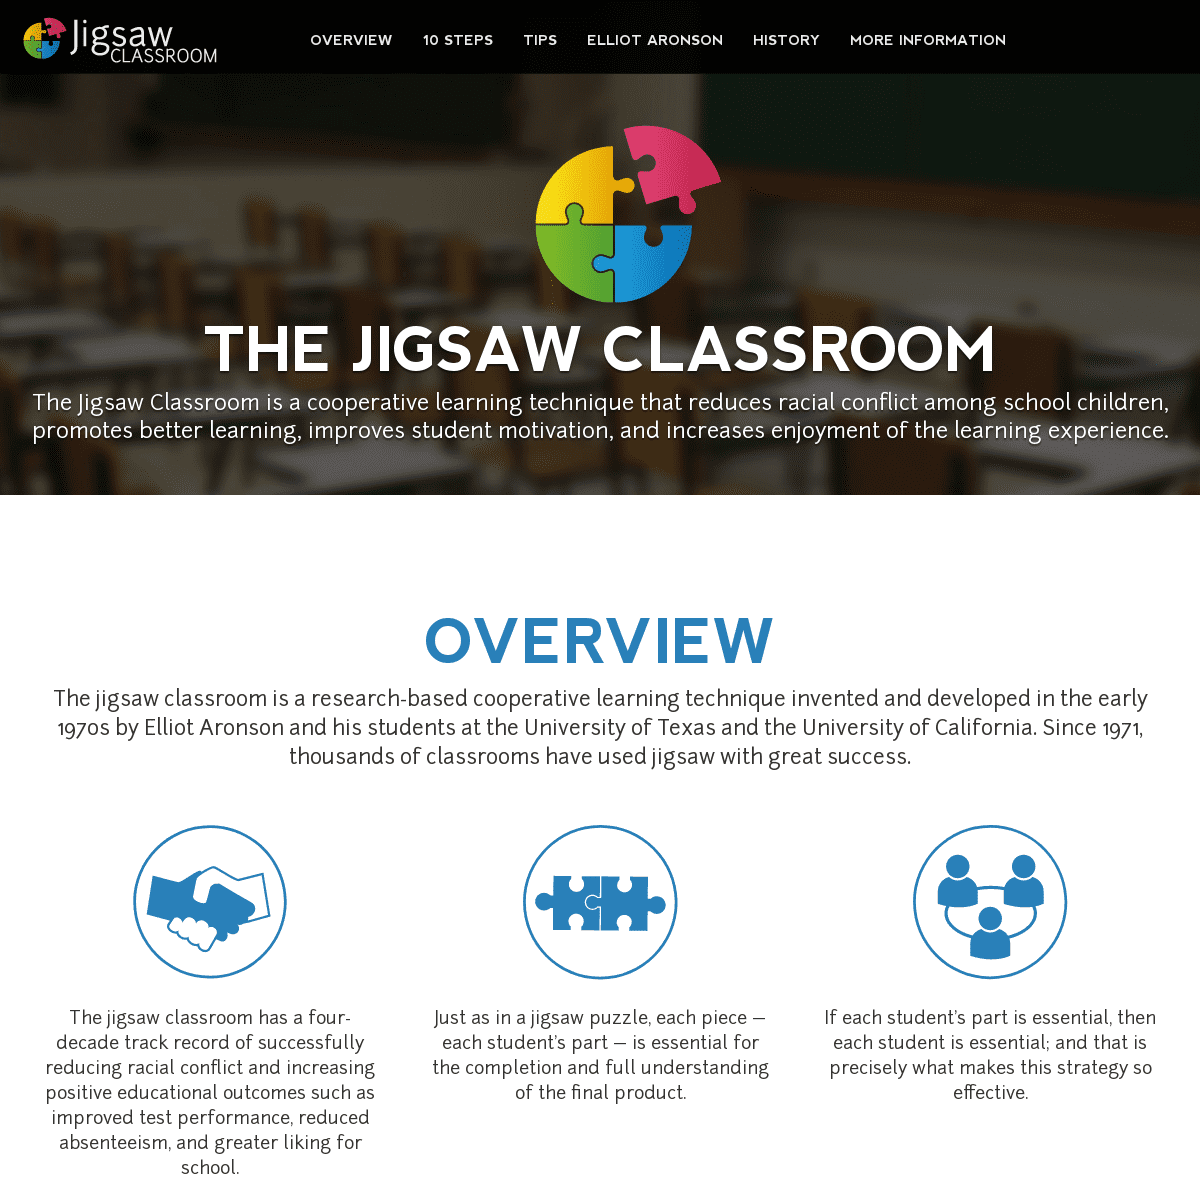 A complete backup of jigsaw.org